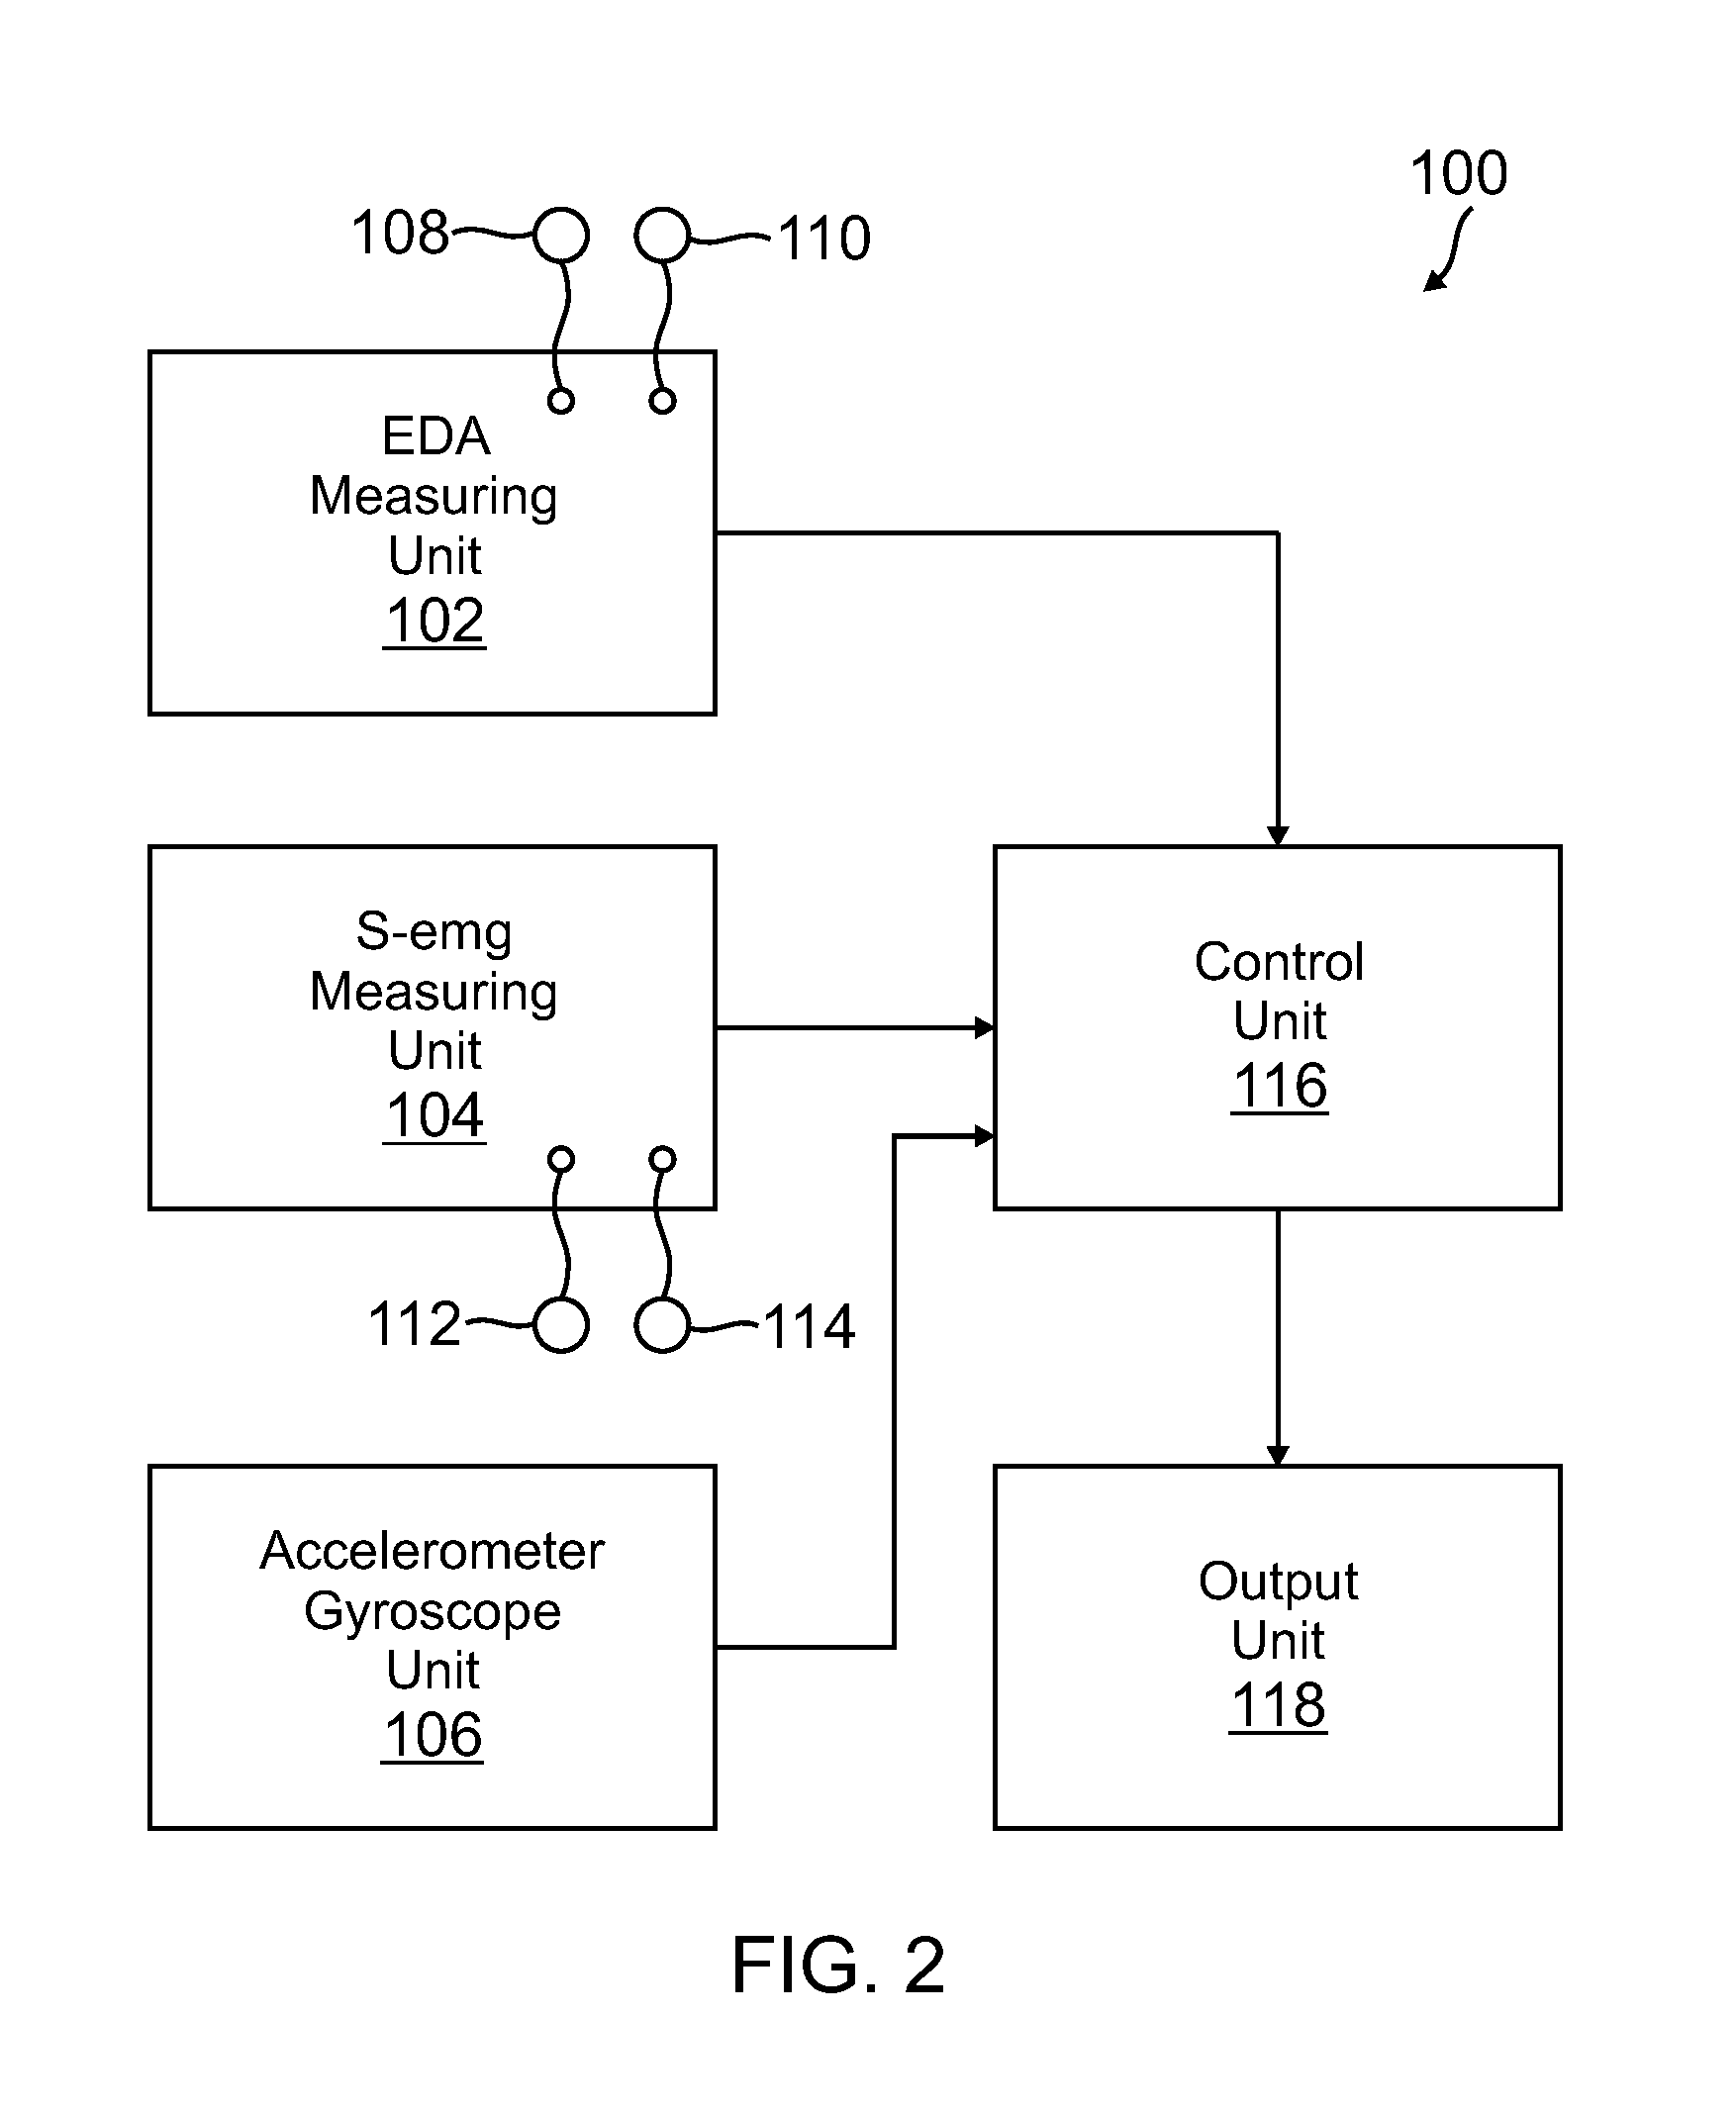 Method for prediction, detection, monitoring, analysis and alerting of seizures and other potentially injurious or life-threatening states